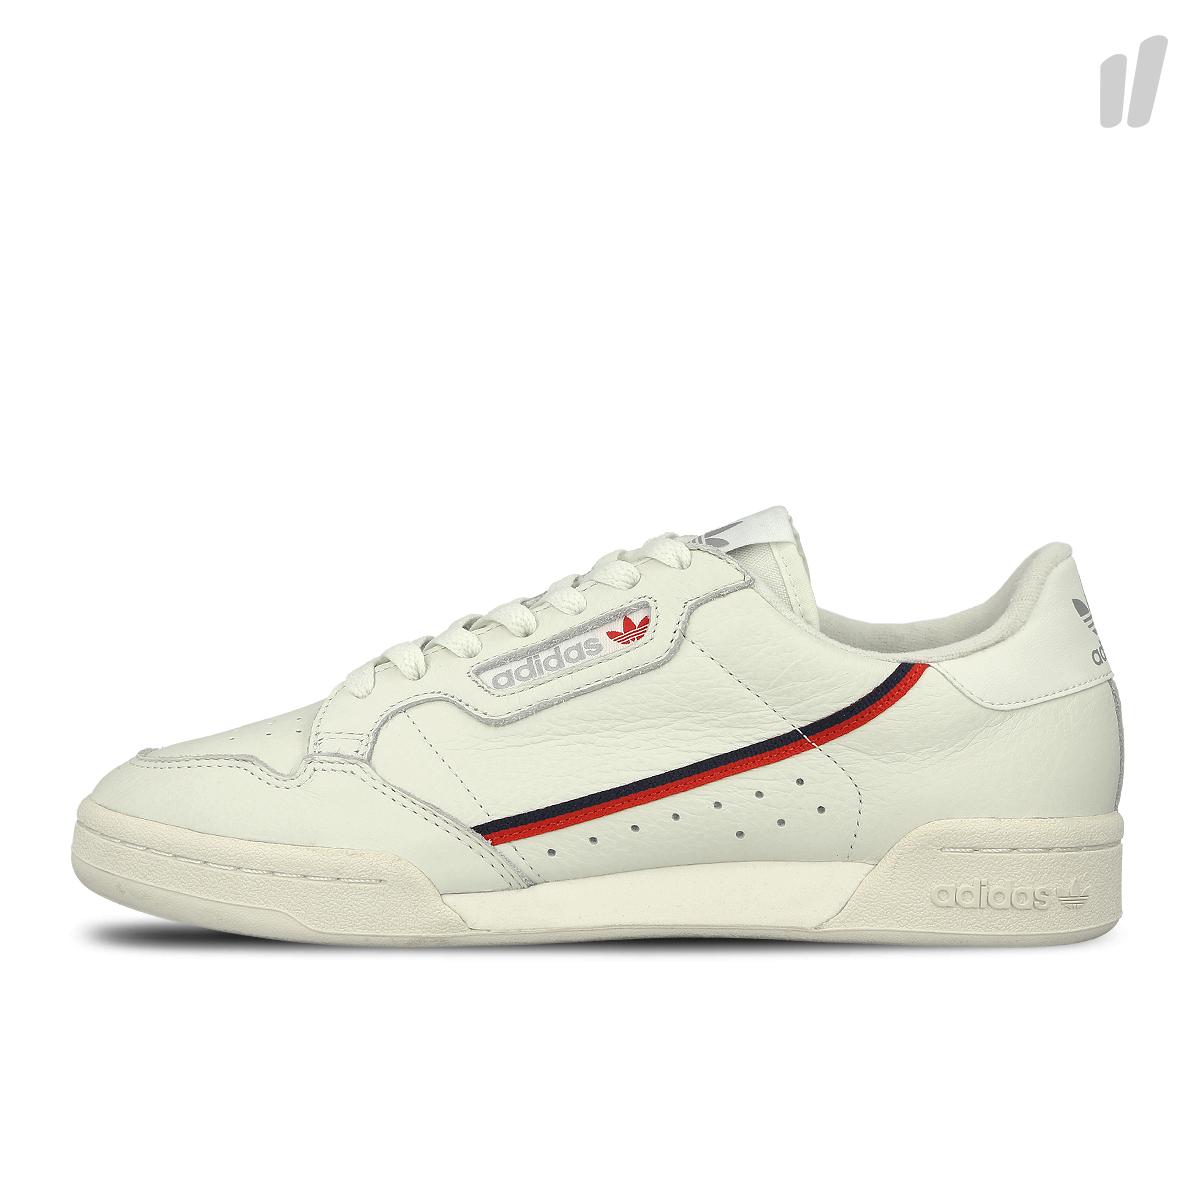 adidas Continental 80 (B41680) - SNEAKER SEARCH